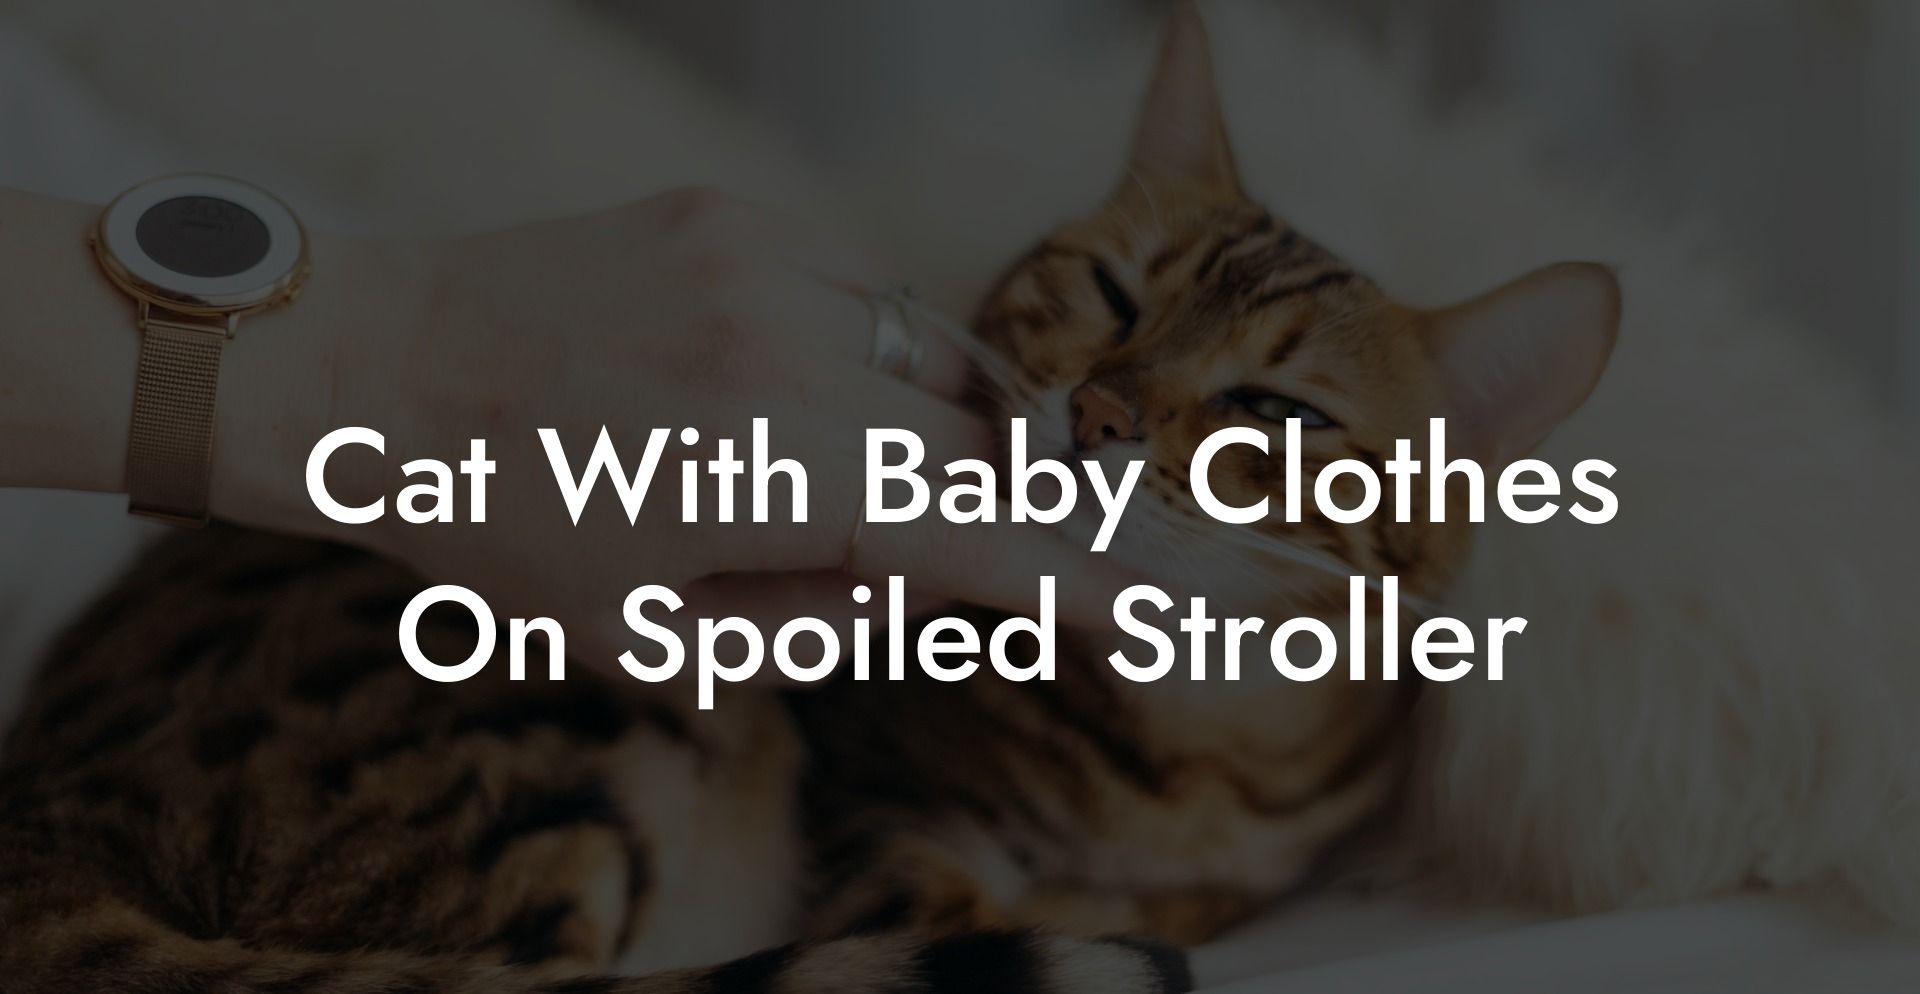 Cat With Baby Clothes On Spoiled Stroller